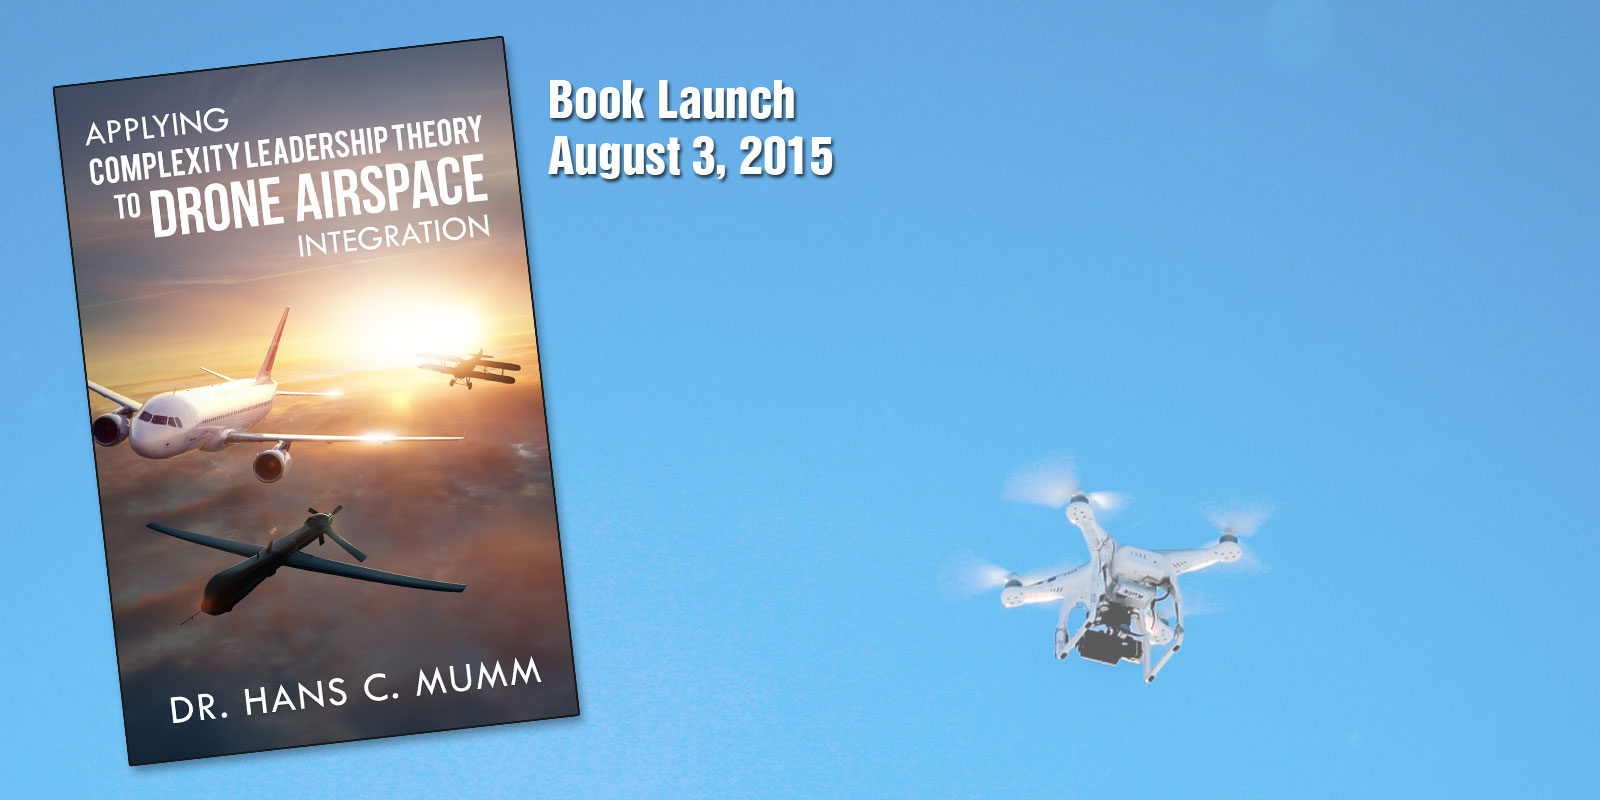 Applying Complexity Leadership Theory to Drone Airspace Integration Book Release Announcement